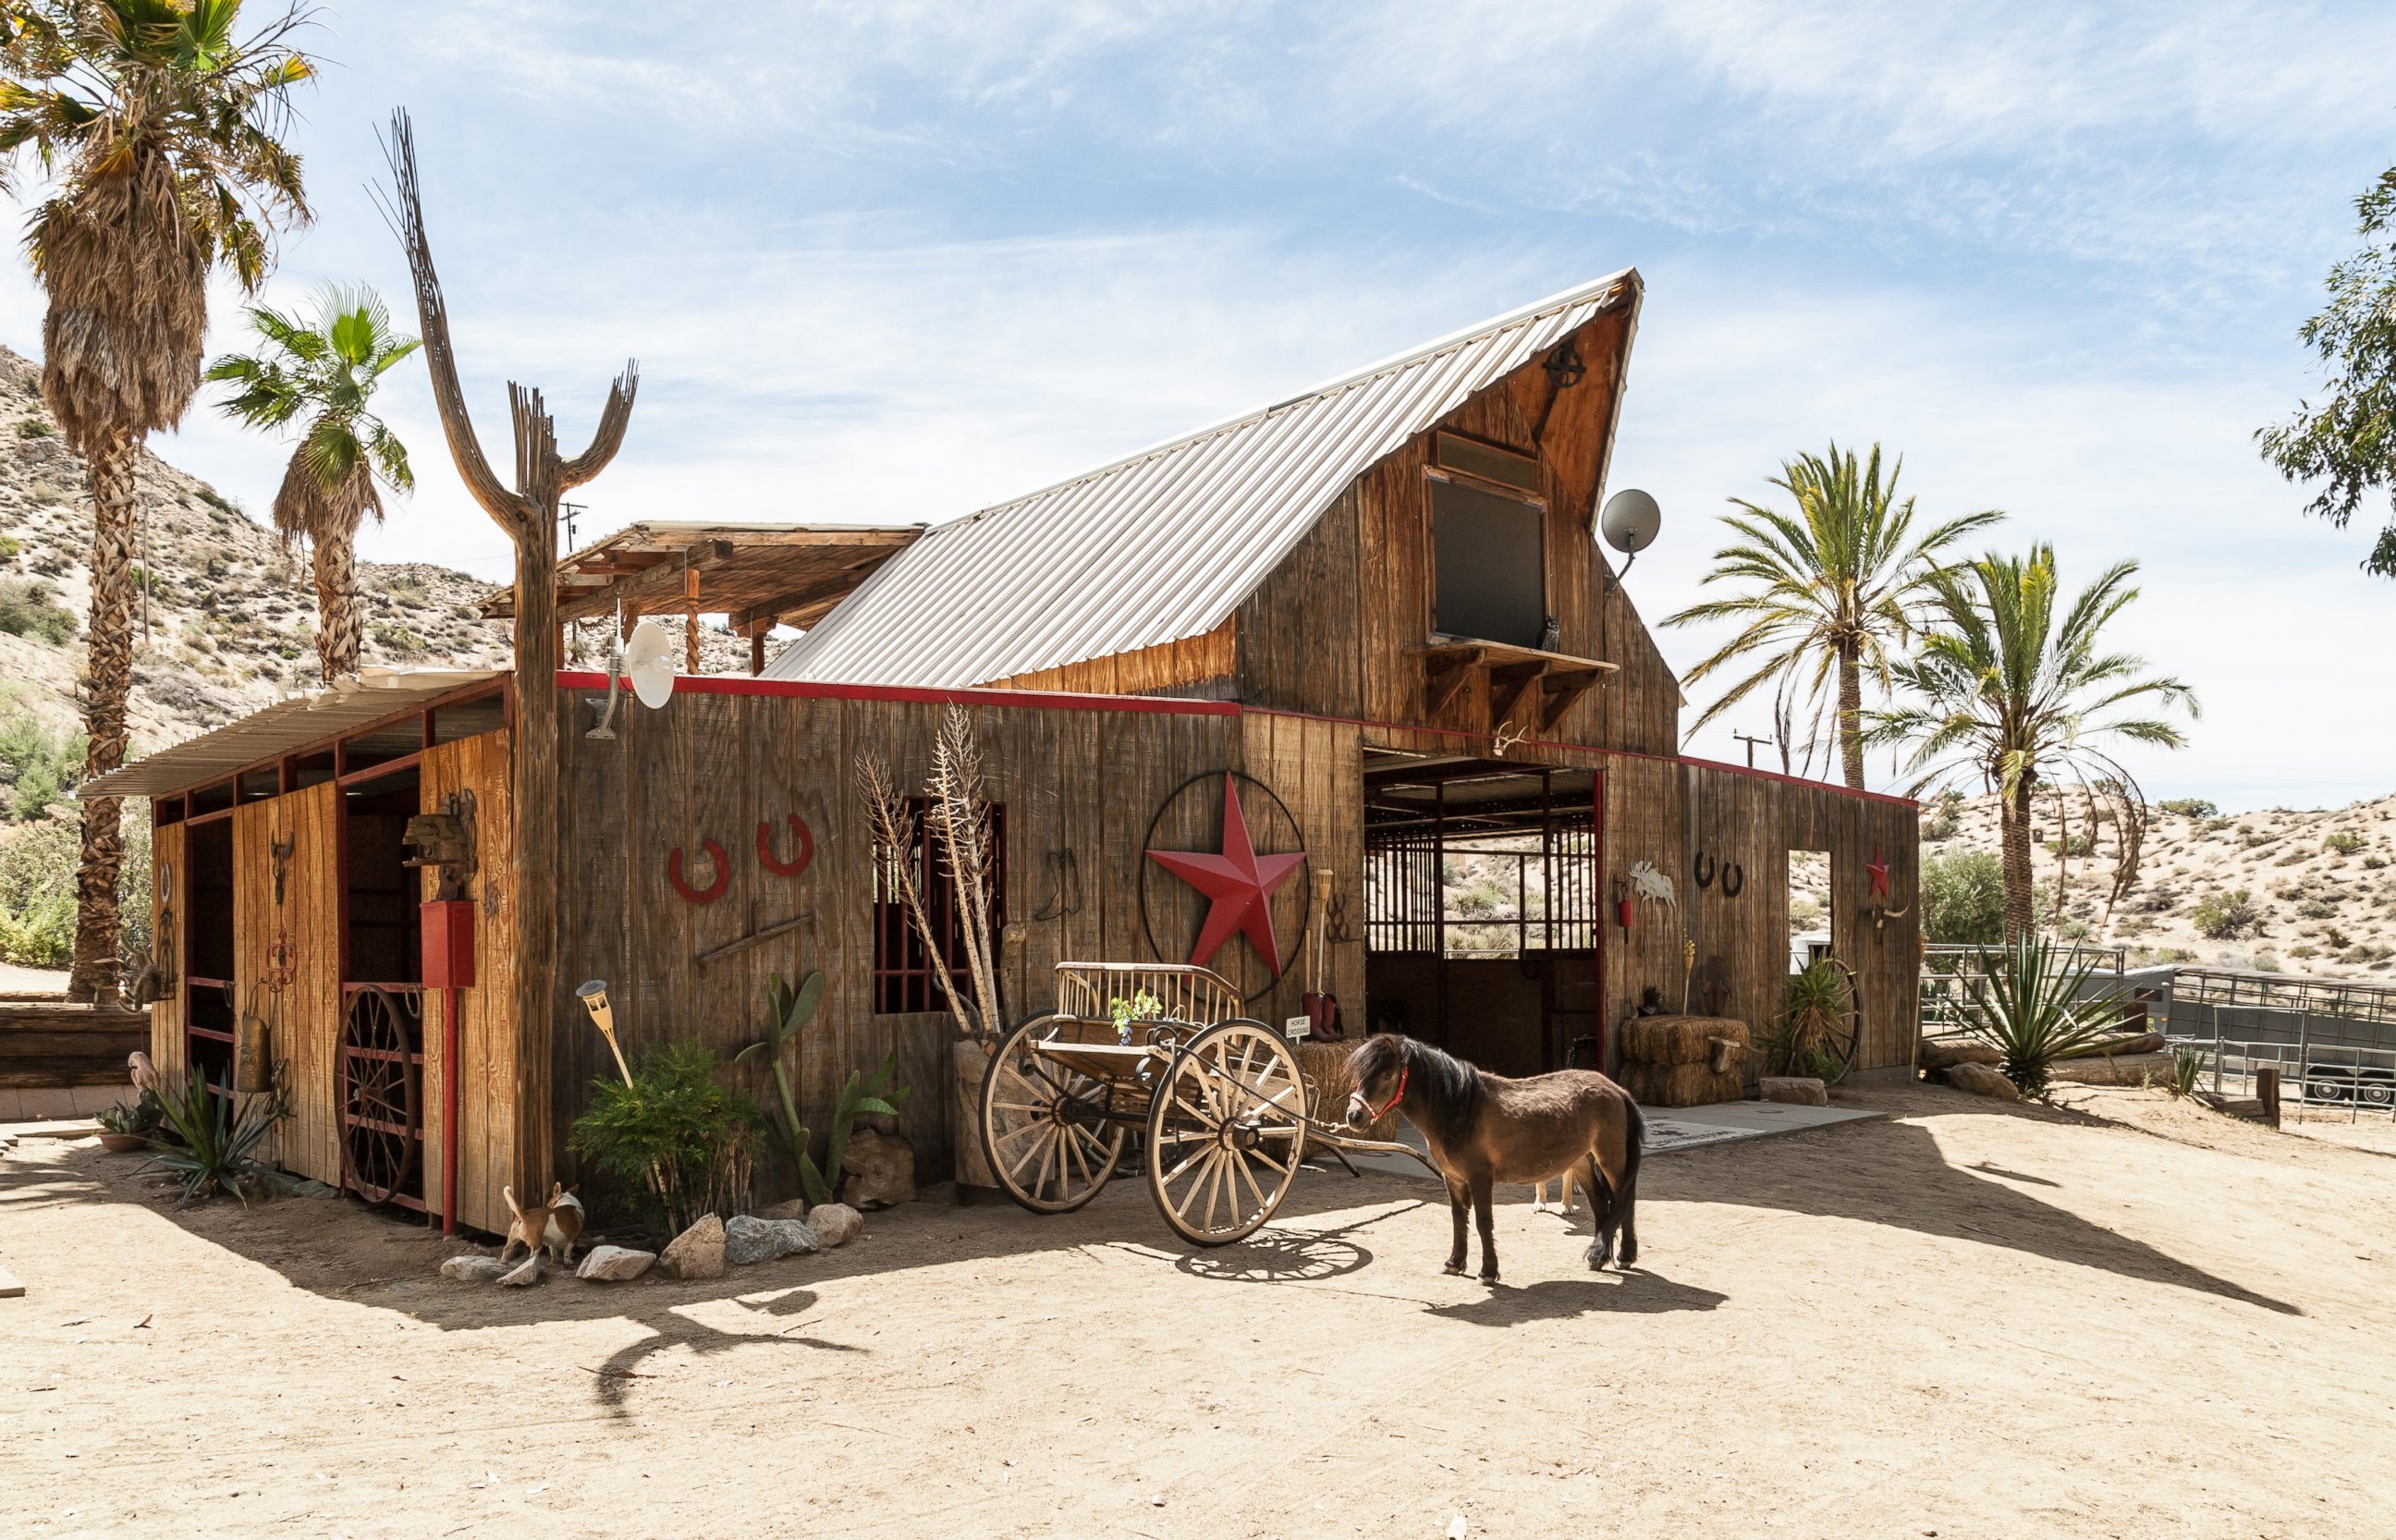 PHOTO: "The Love Nest" is located inside a barn, located in Morongo Valley, Calif.